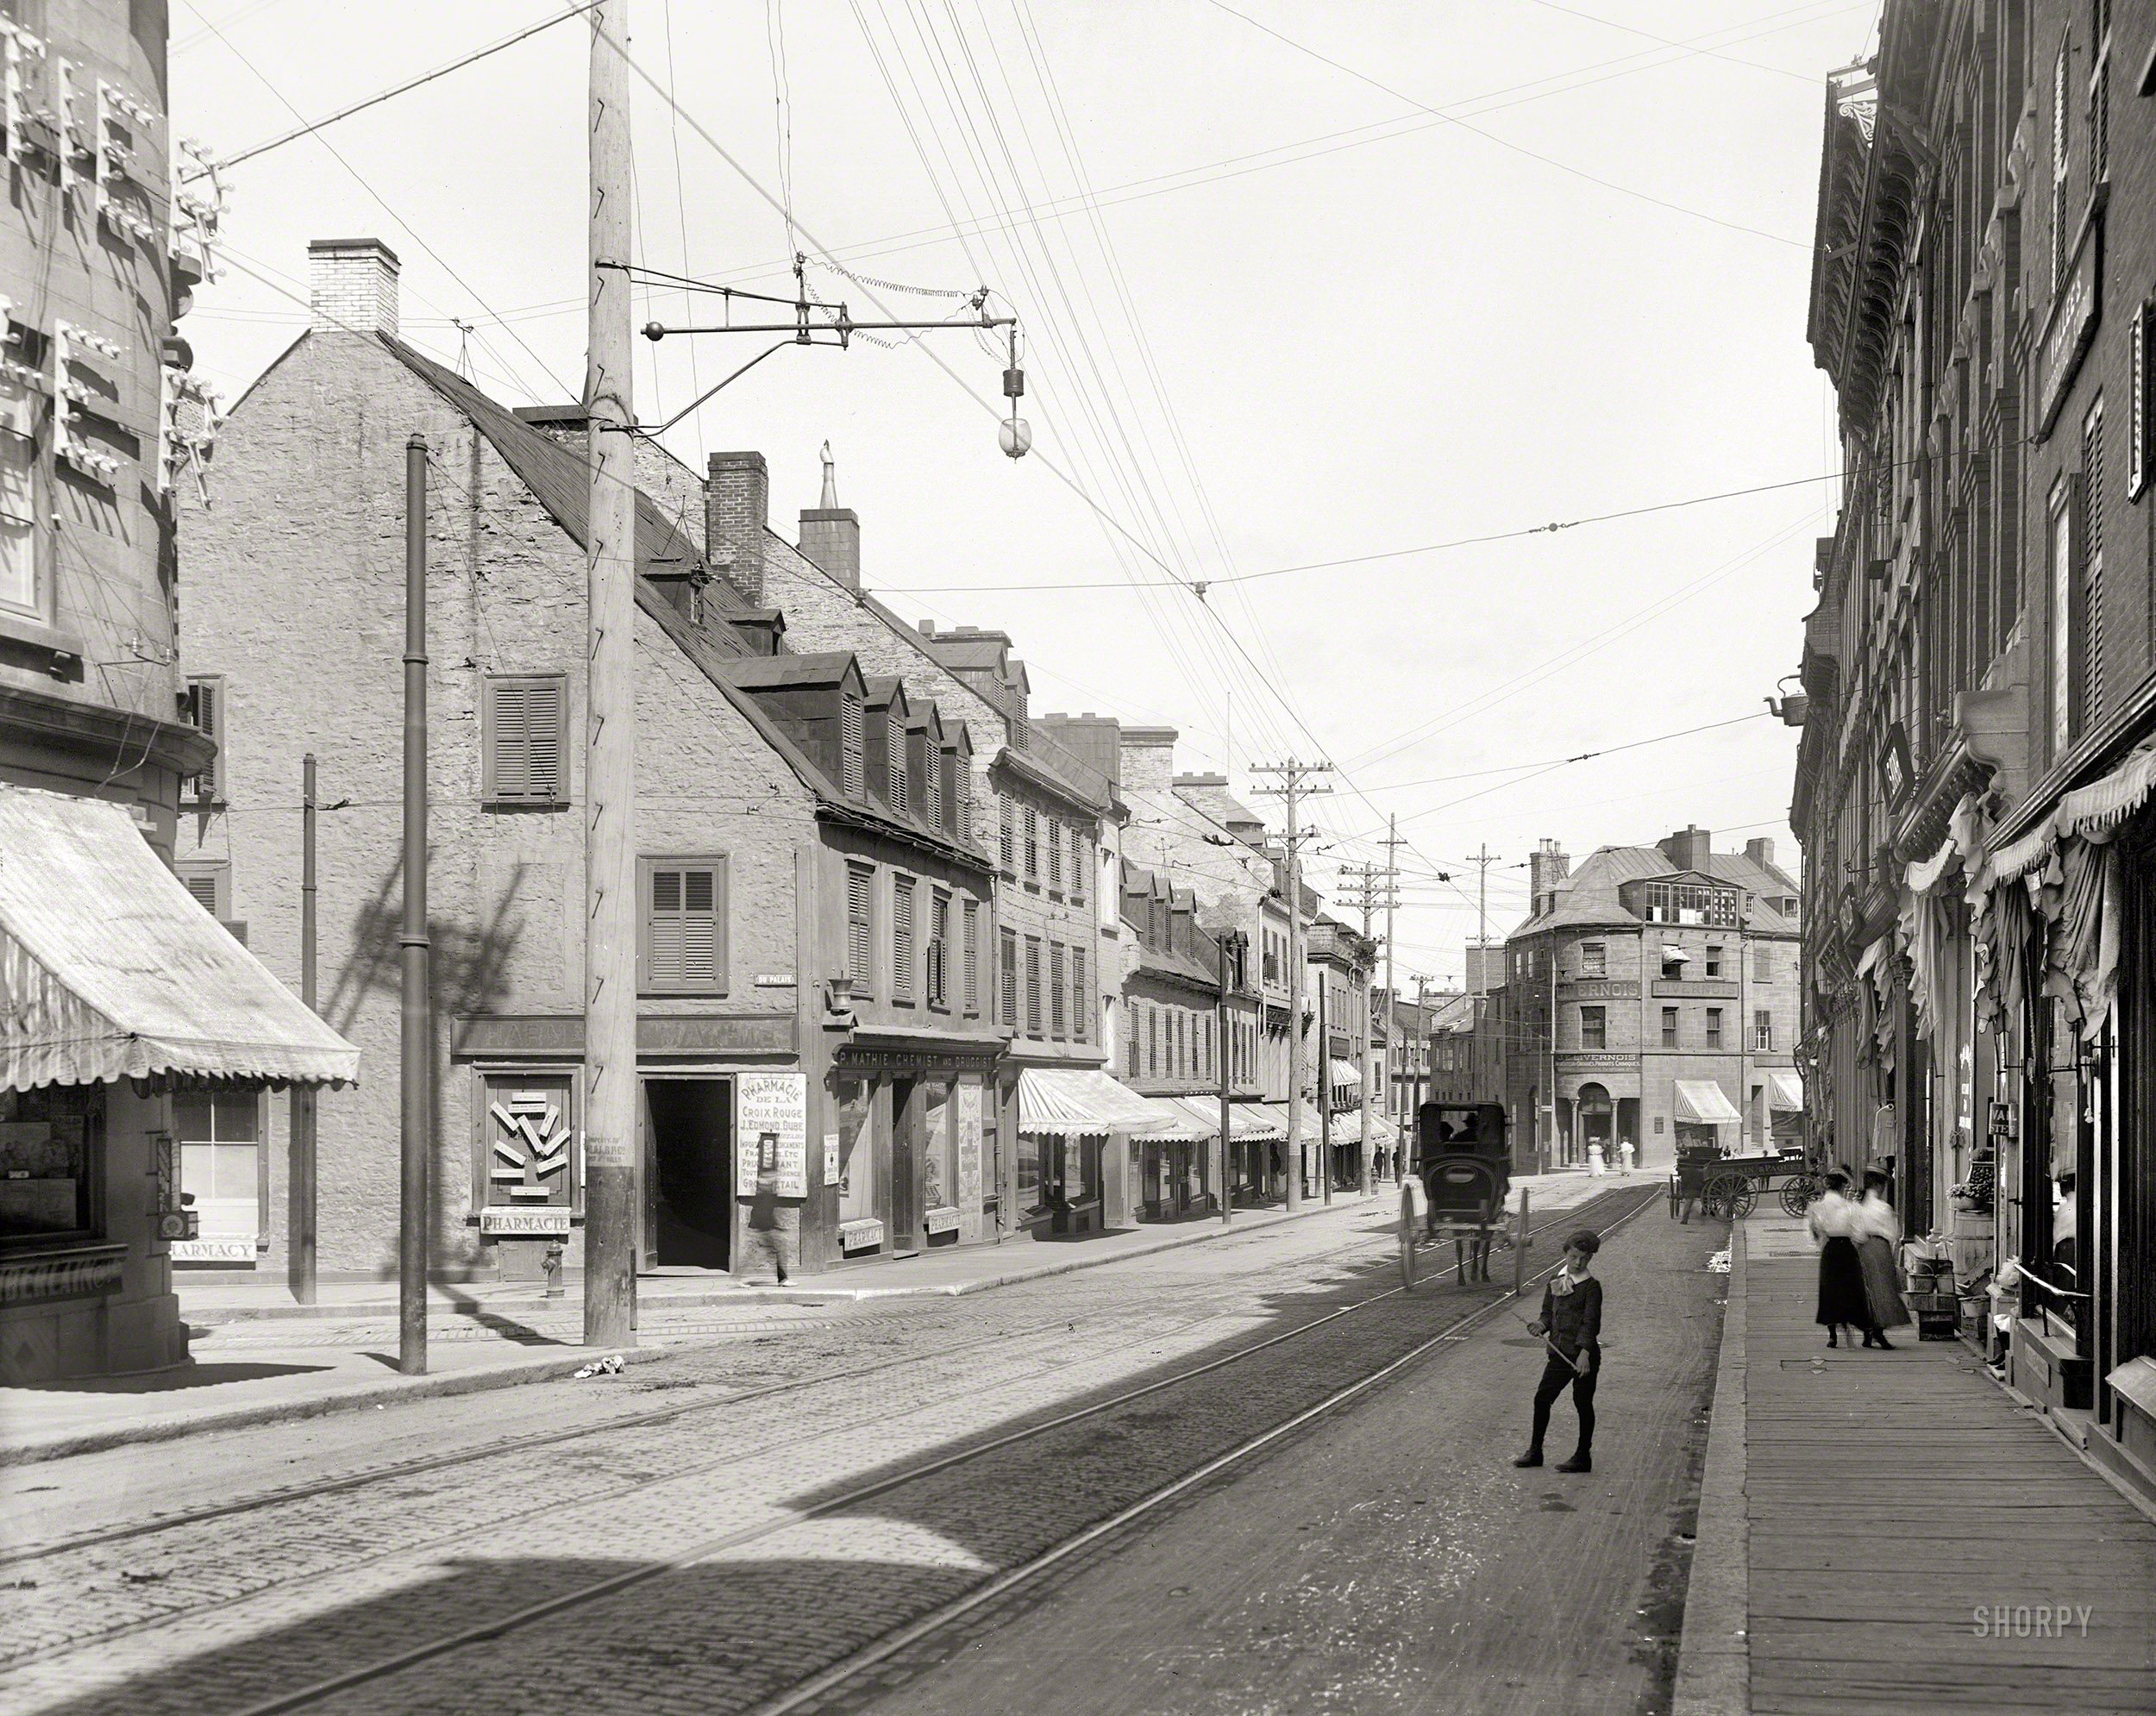 Circa 1905. "St. John Street, Quebec." Rue Saint-Jean at Côte du Palais in Quebec City, home to the drugstores of P. Mathie and J.E. Livernois. 8x10 inch dry plate glass negative, Detroit Photographic Company. View full size.